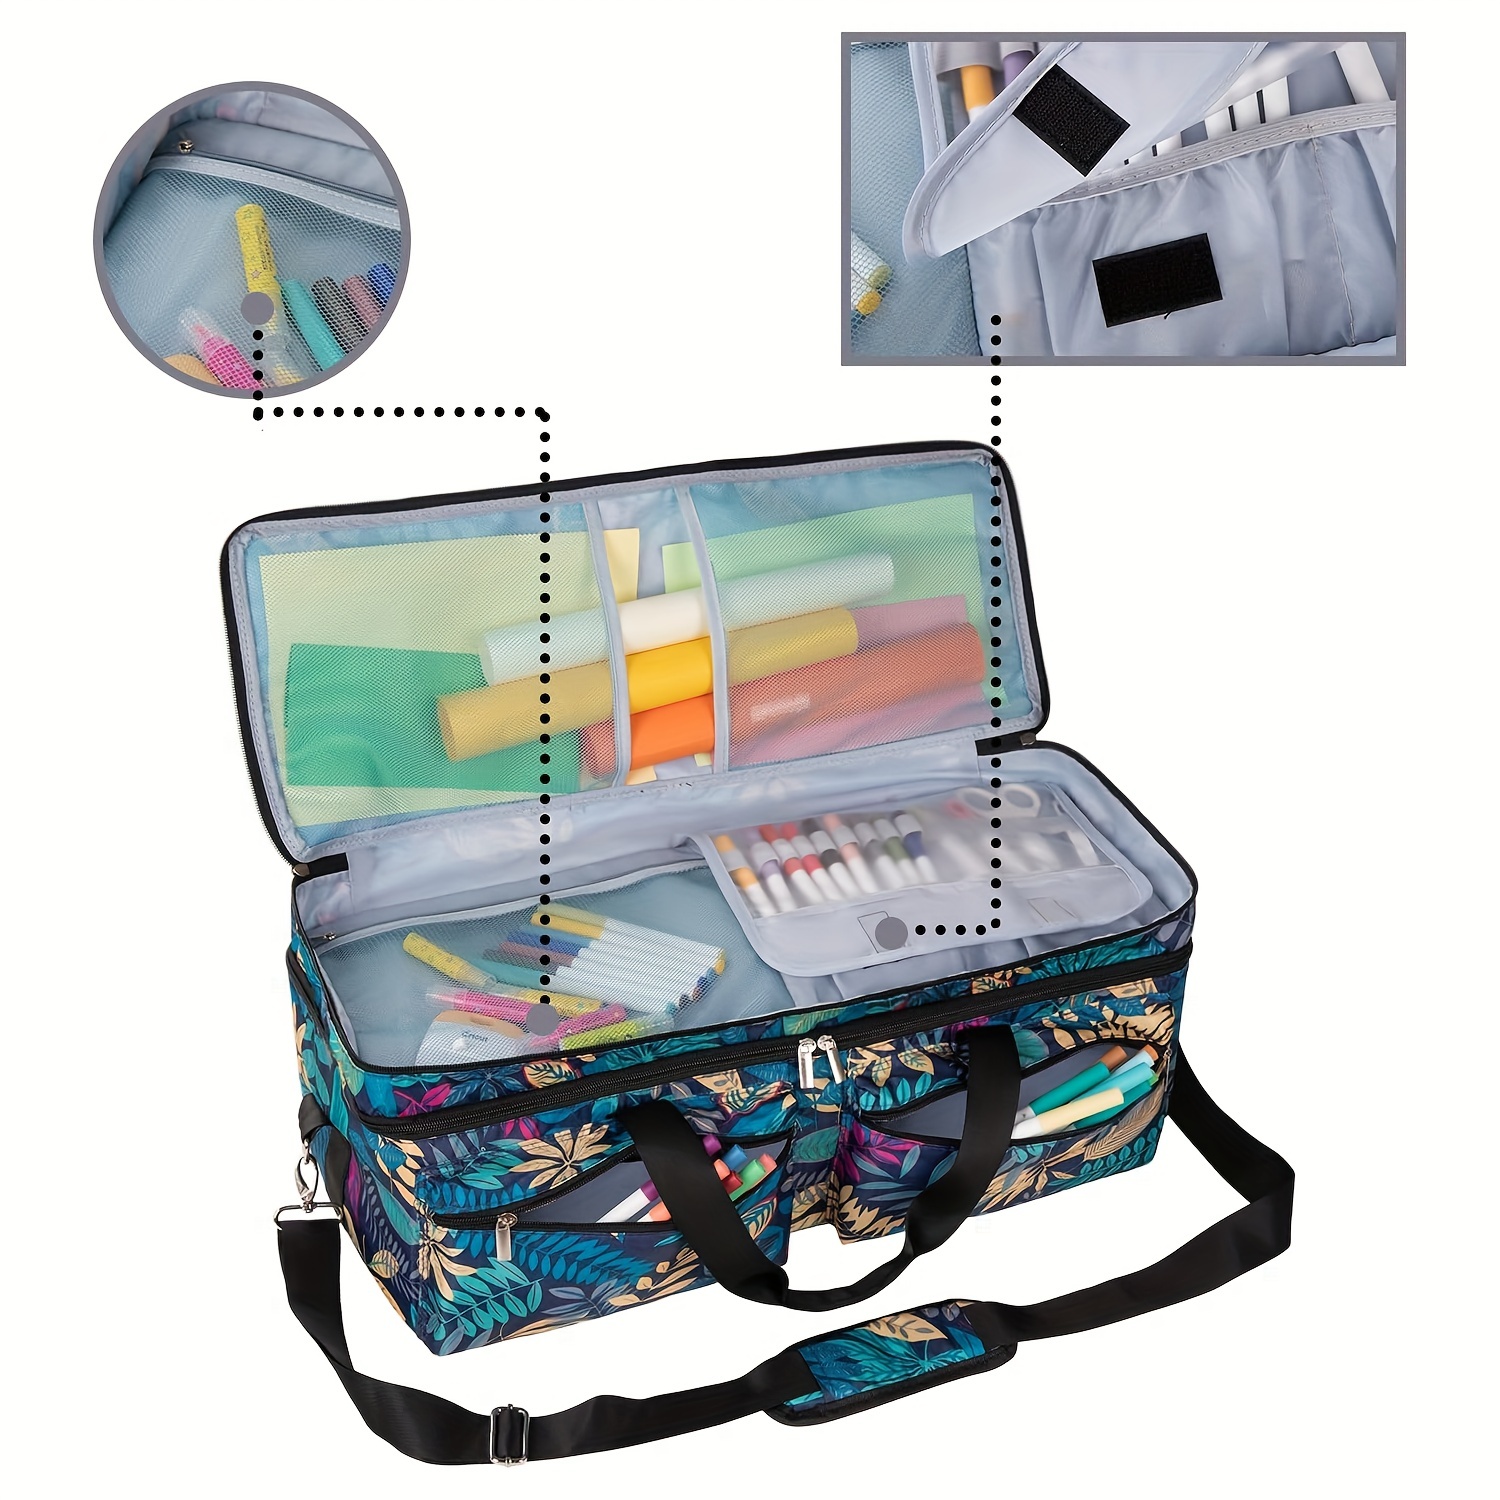 Carrying Case, For Cricut Explore Air 1 2 3, Double-layer Bag Compatible  With Cricut Maker 1 2 3